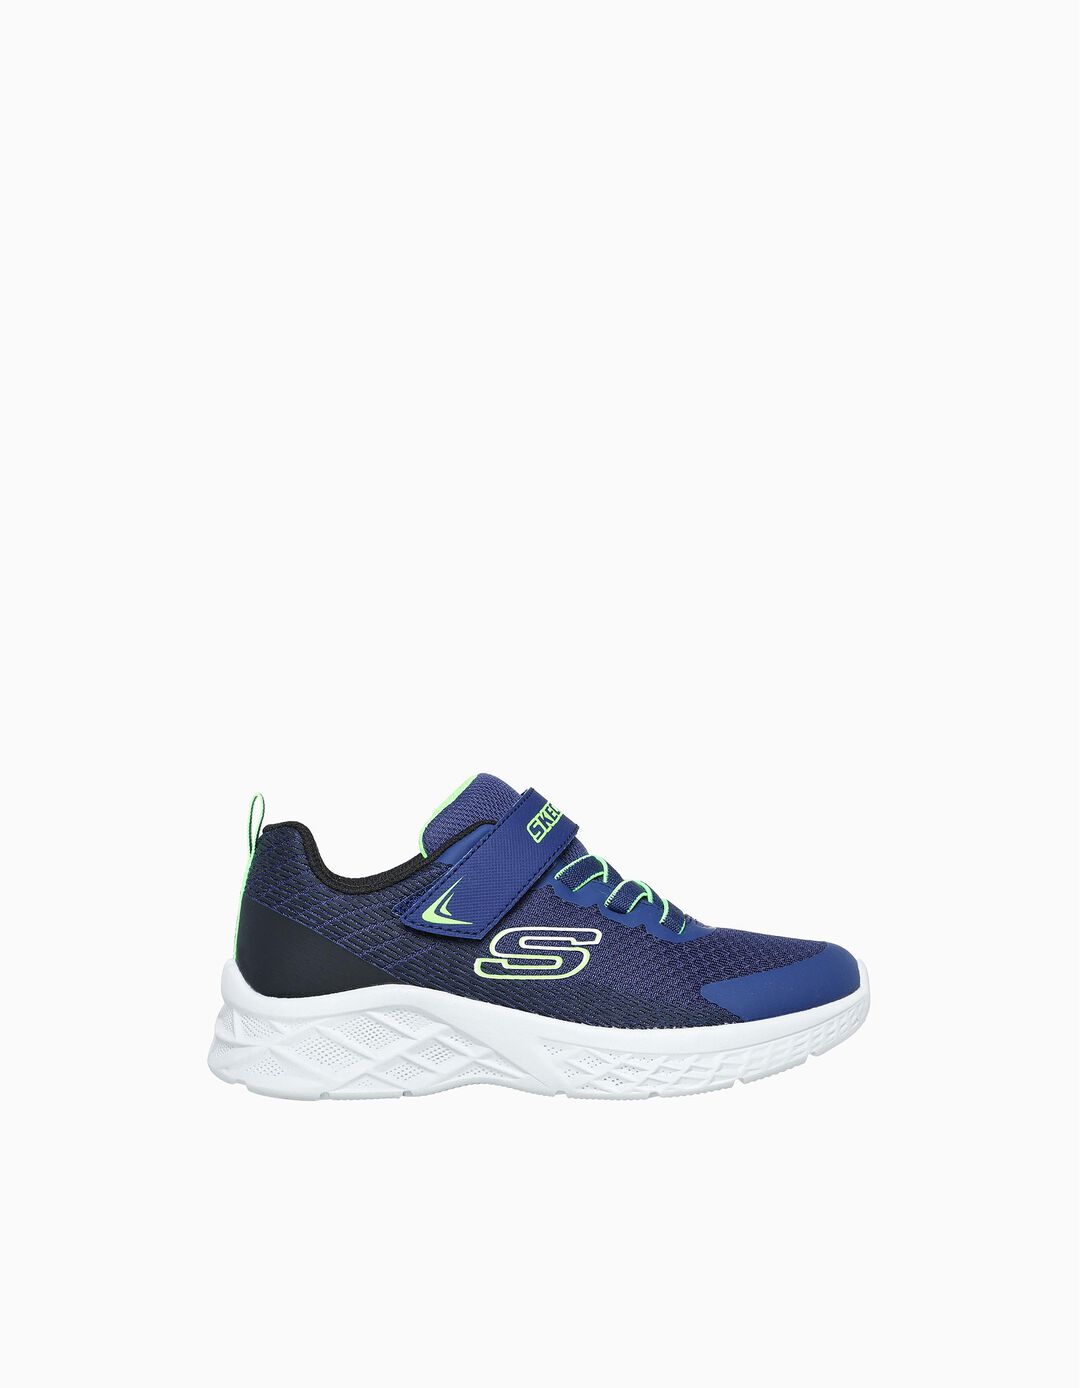 'Skechers' Sneakers with Elastic Laces and Slip-on Strap, Boys, Blue